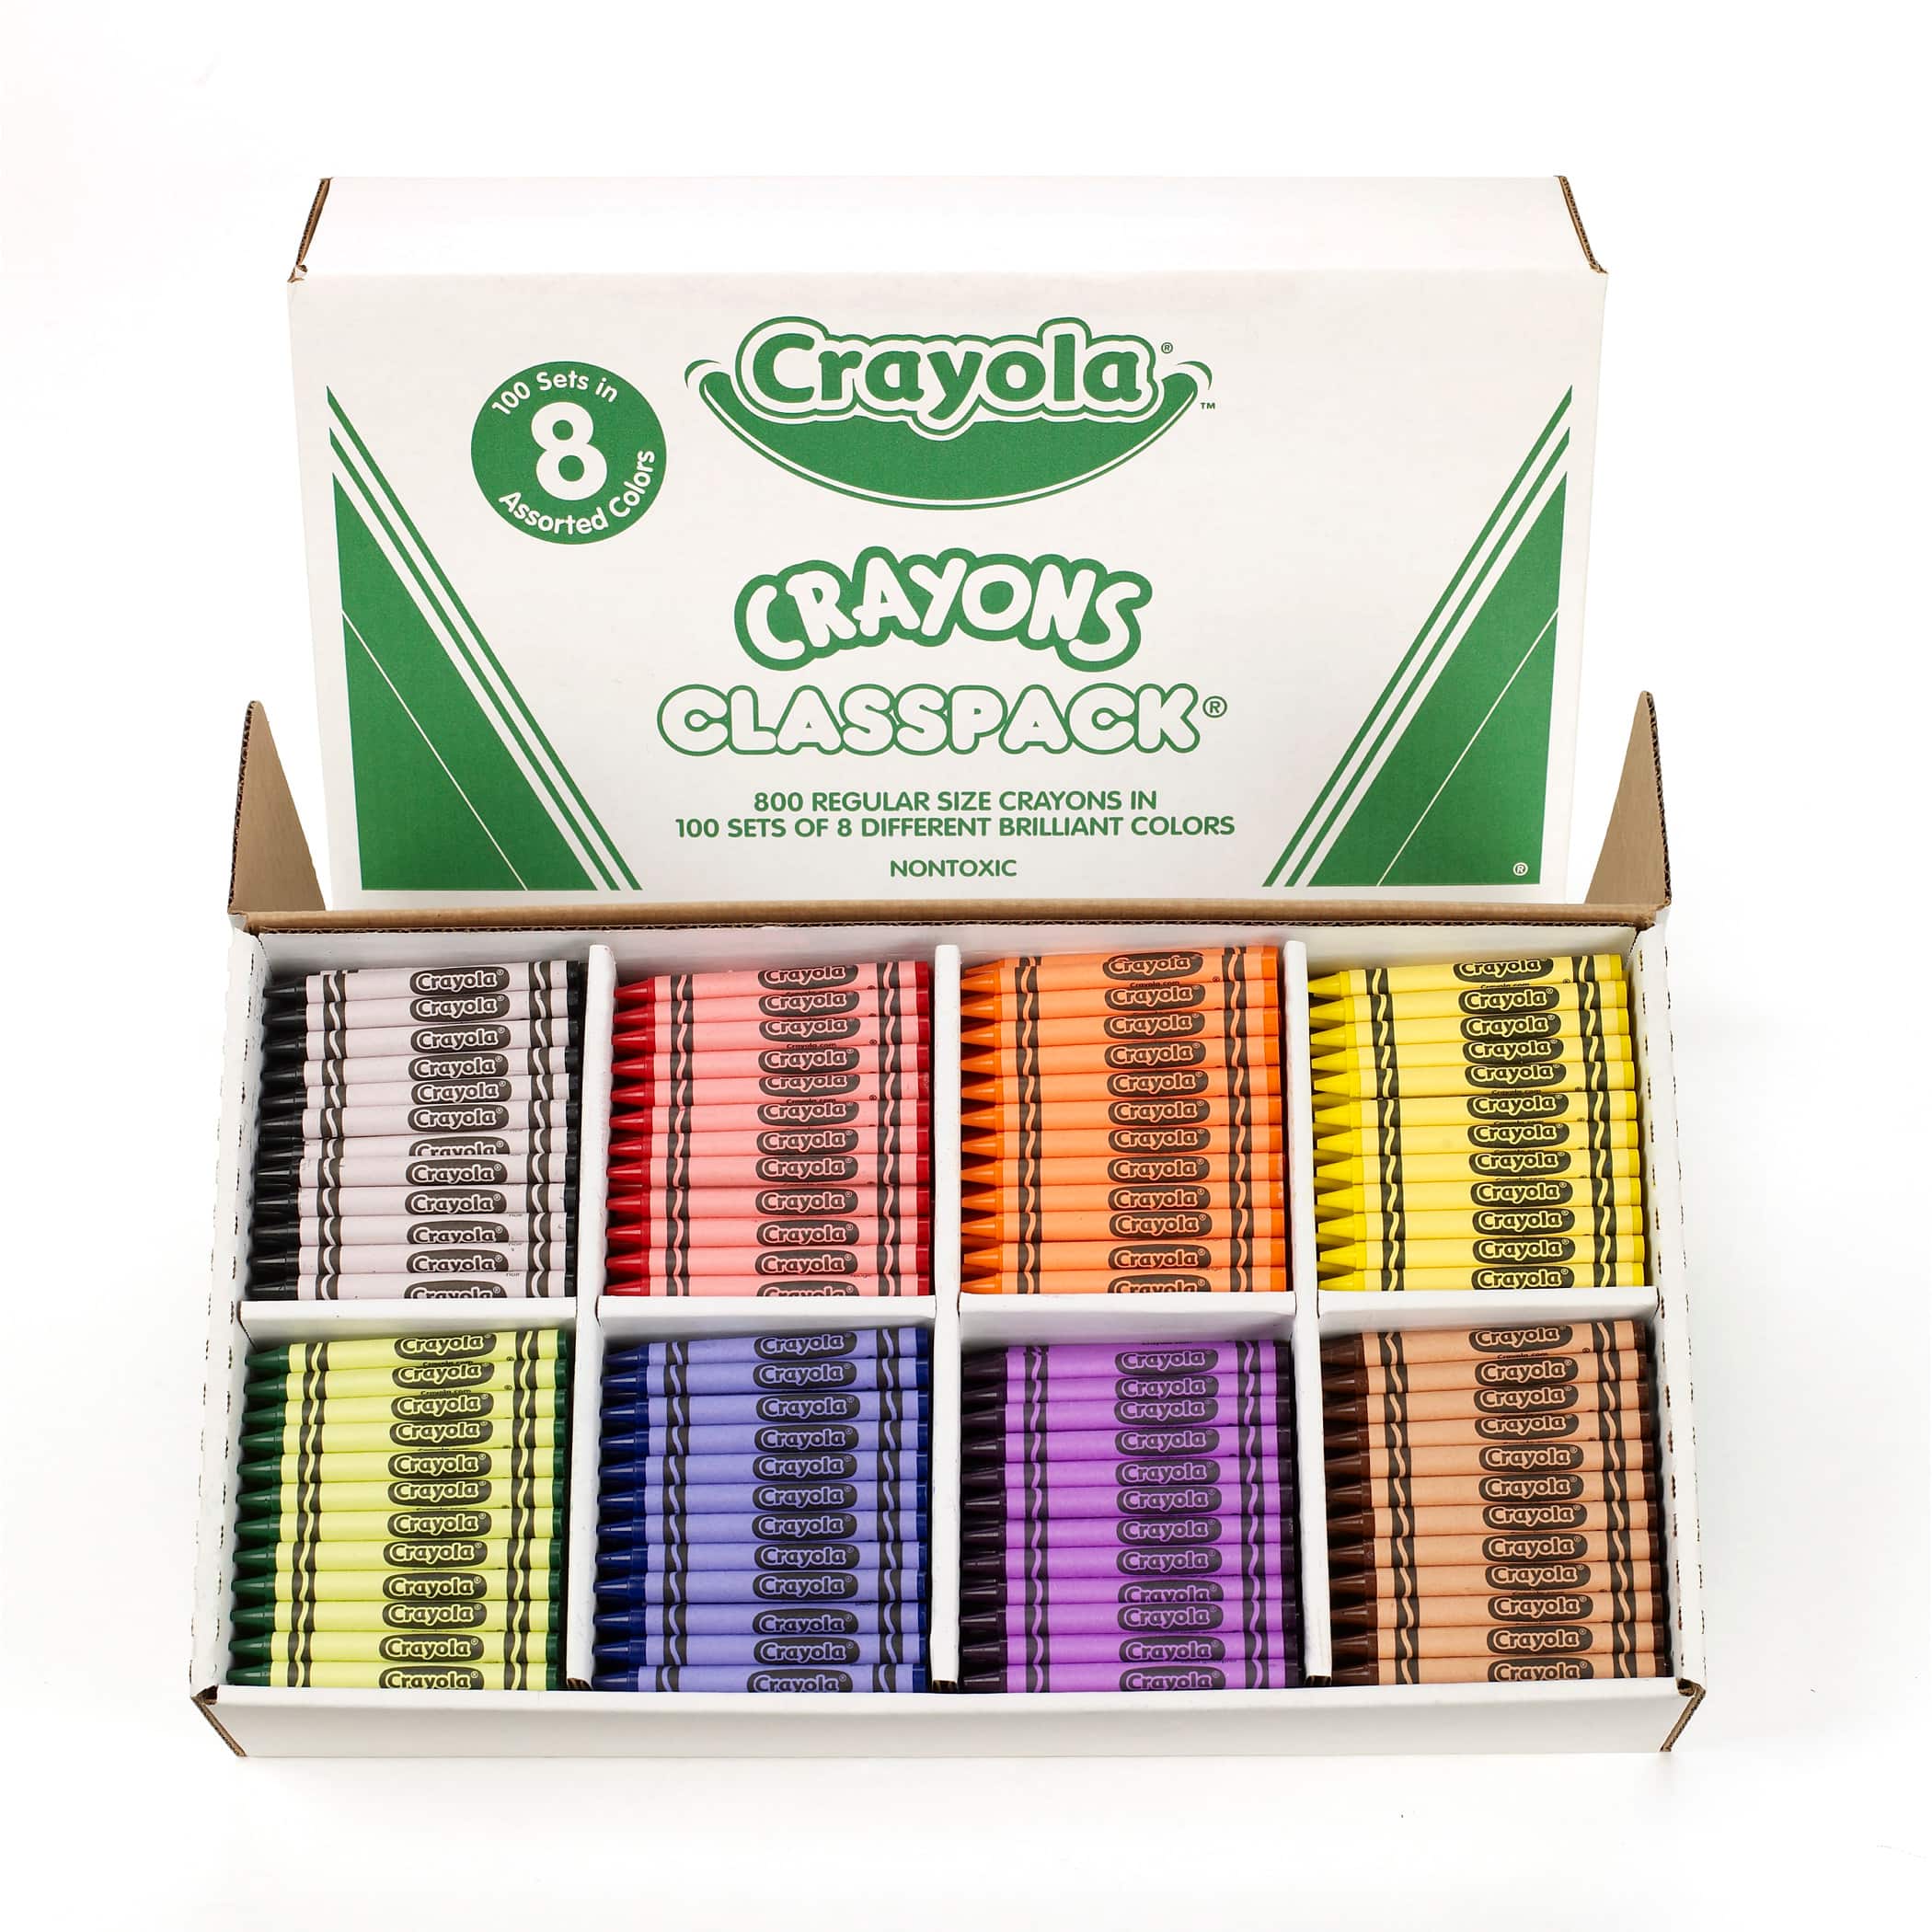 Crayons (6 Pack)